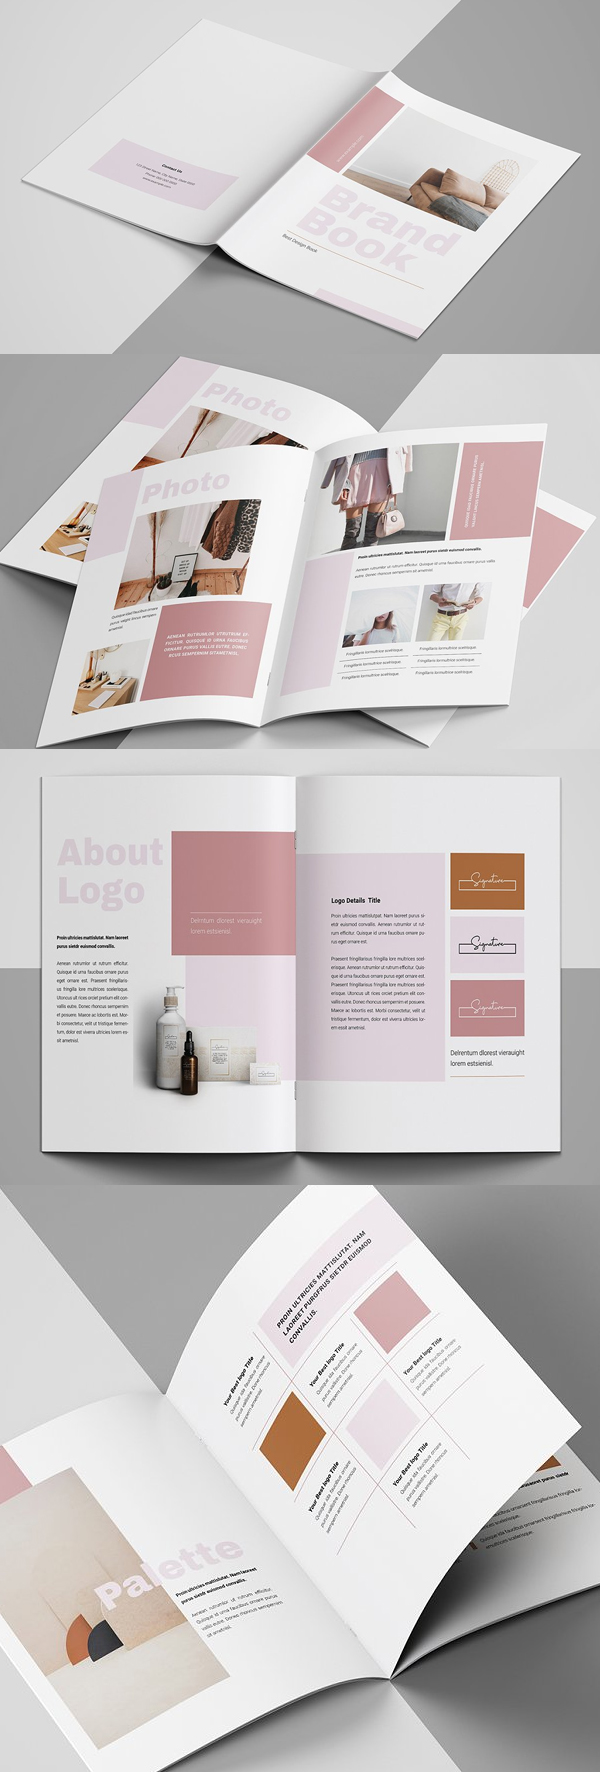 Brand Guidelines | Brand Manual